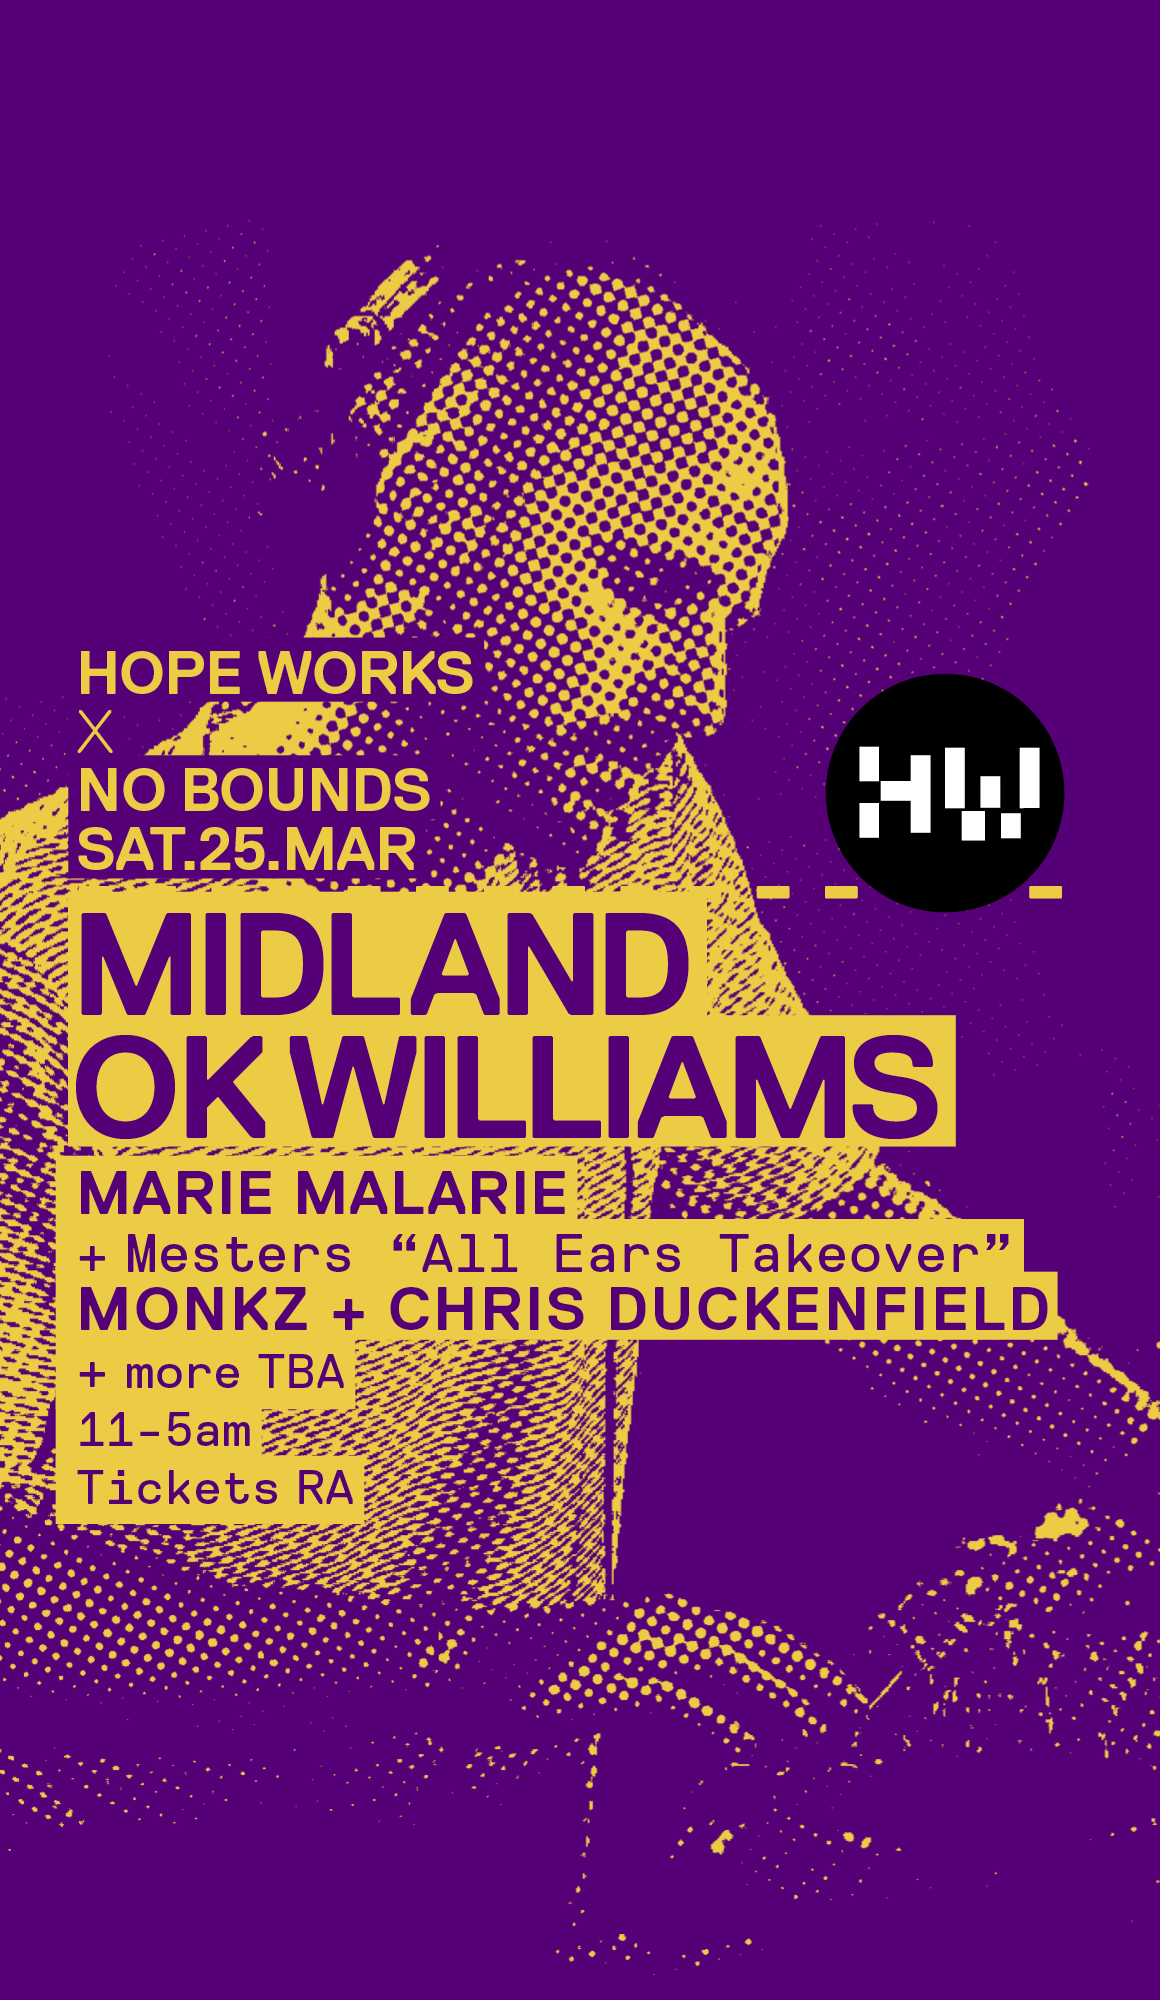 Hope Works: Midland, OK Williams, Marie Malarie, All Ears Takeover ft Chris Duckenfield, Monkz - フライヤー表